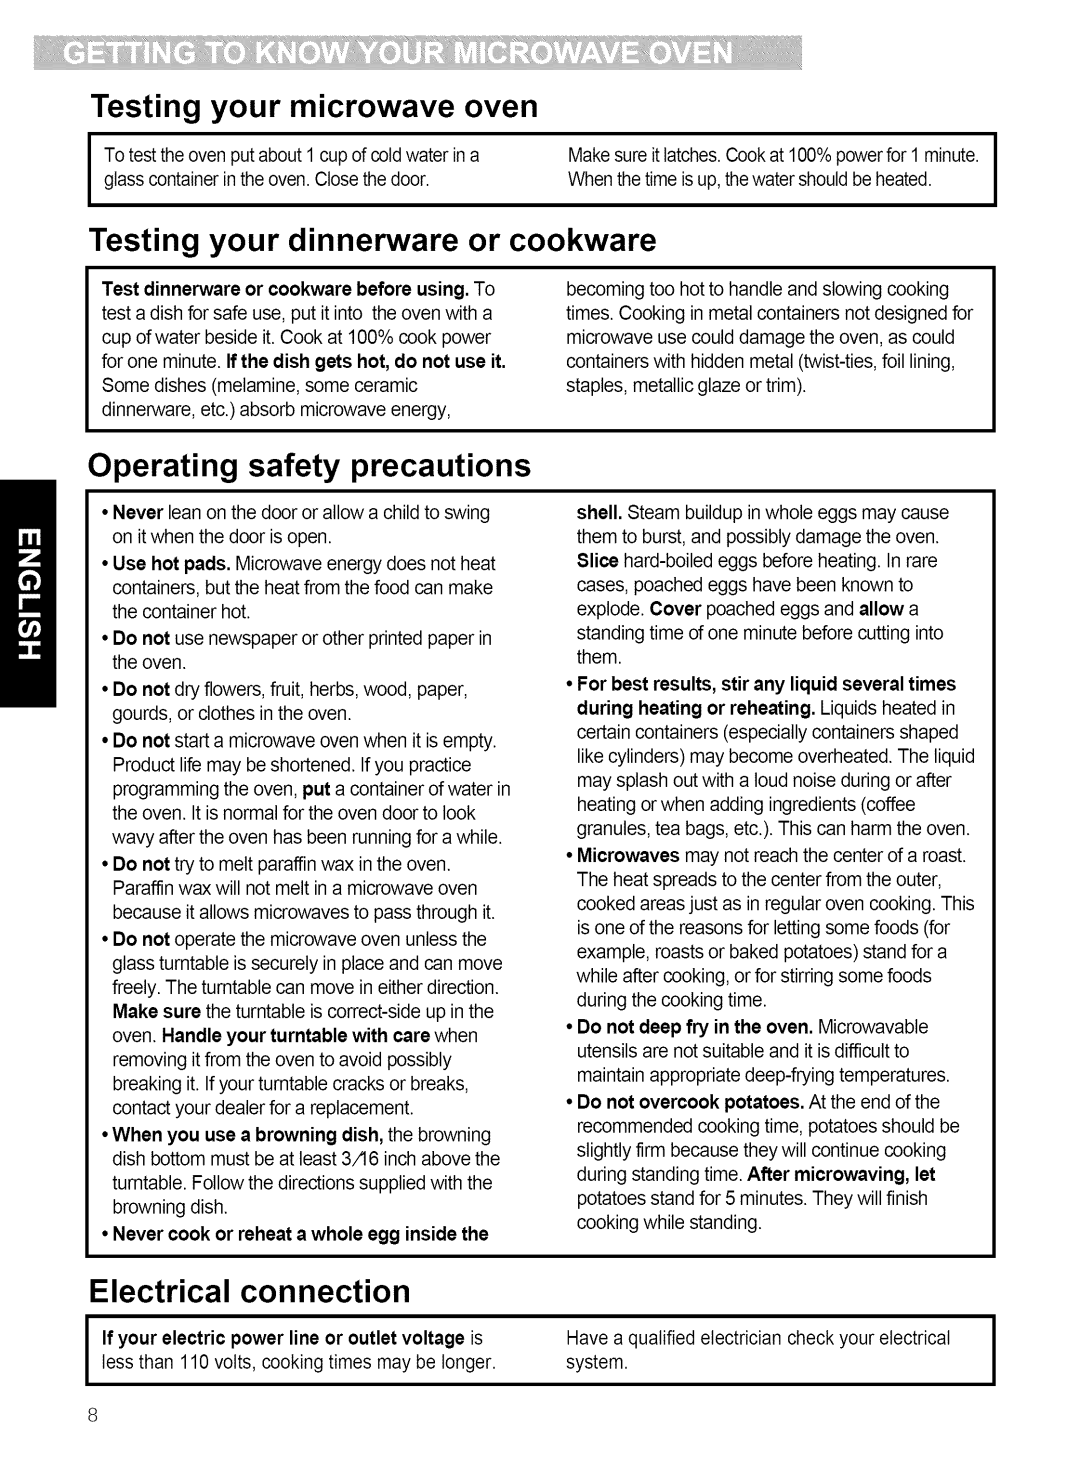 Kenmore 721.80864 manual Testing your microwave oven, Testing your dinnerware or cookware, Operating safety precautions 